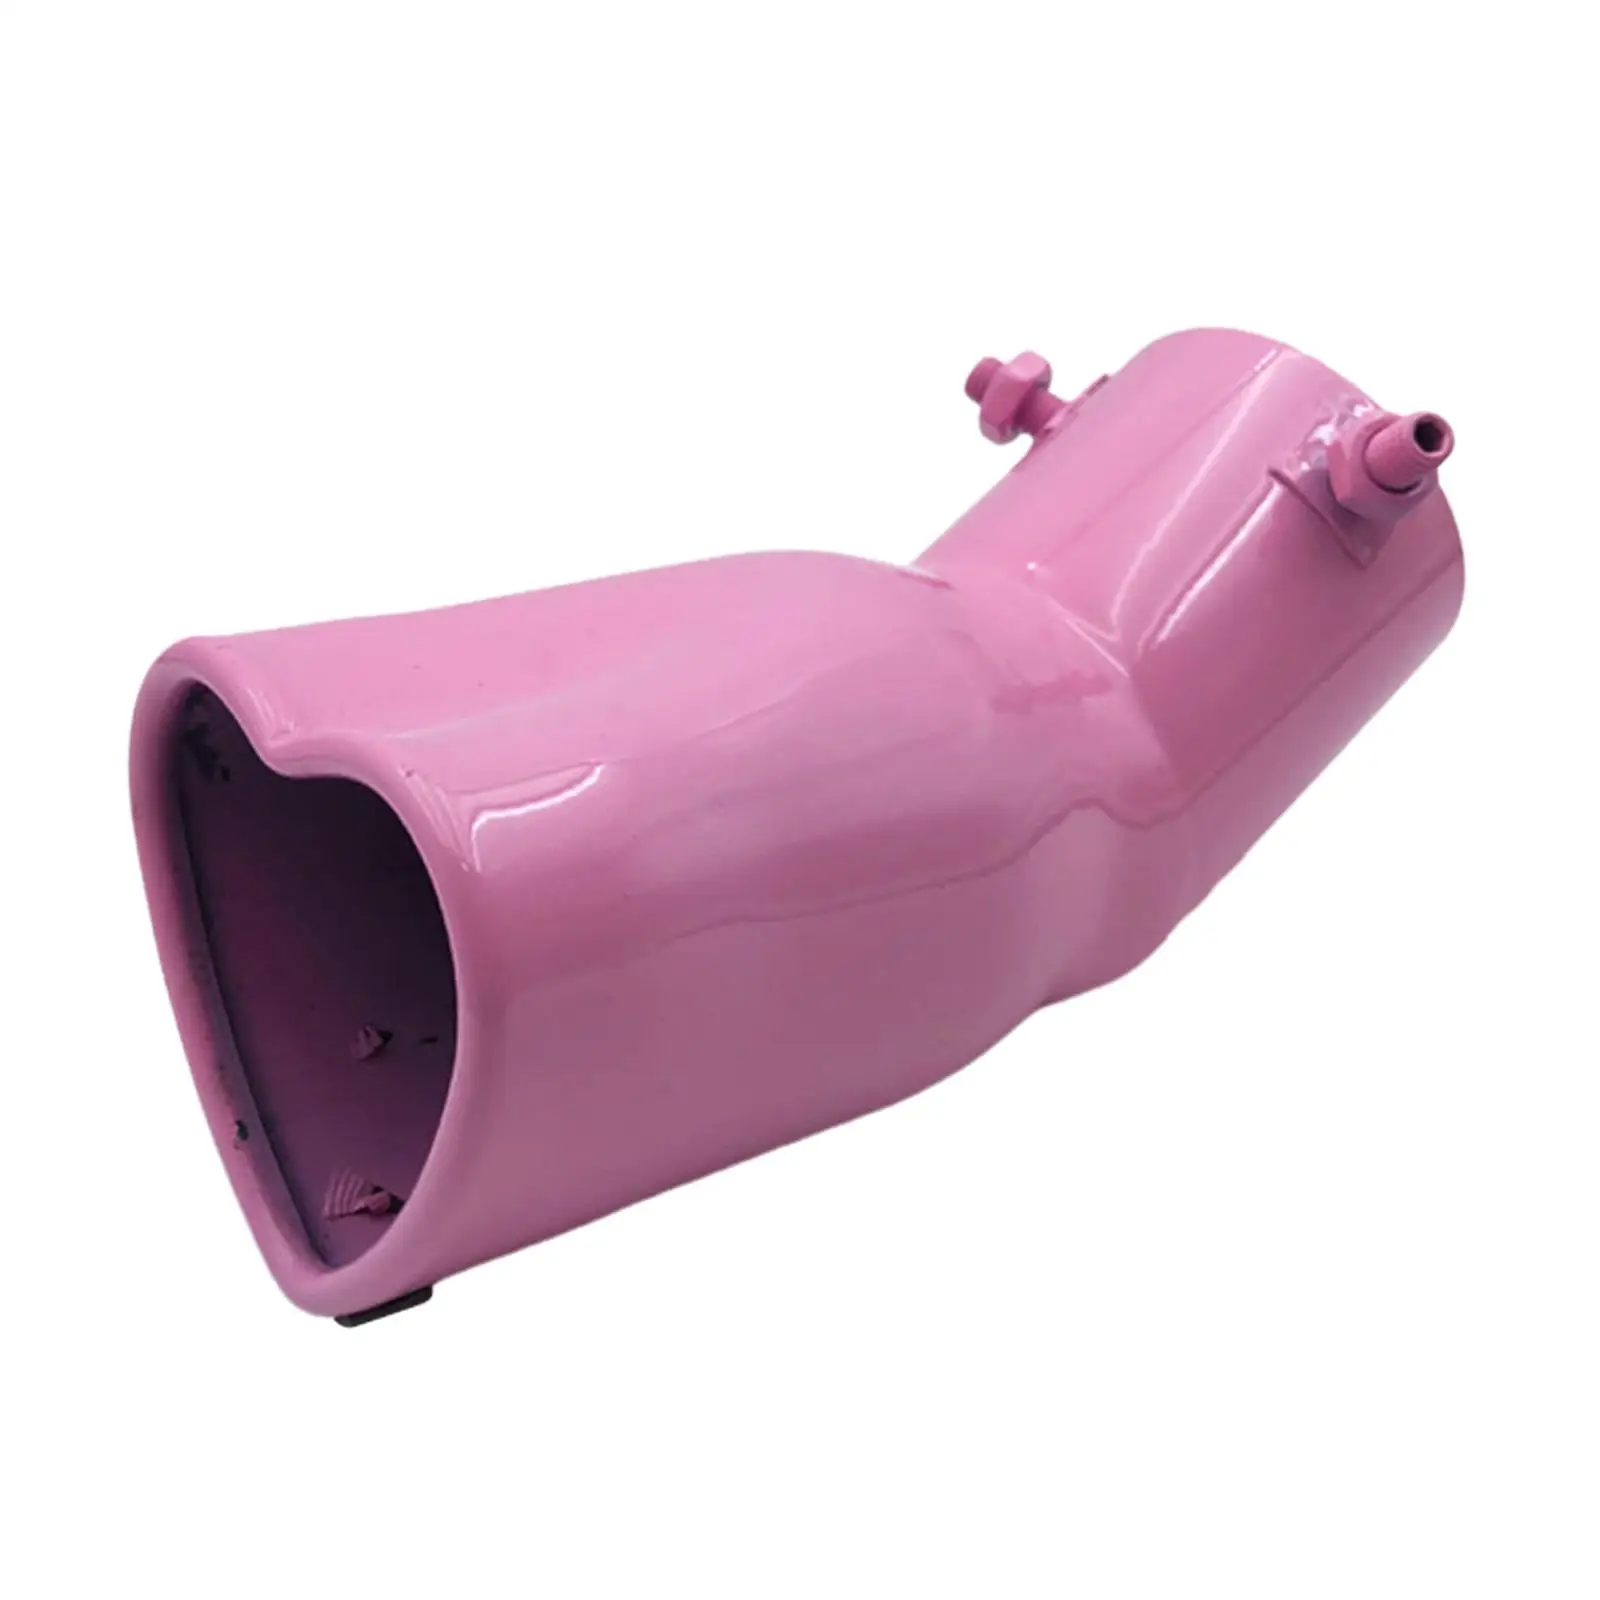 Car Modified Exhaust Pipe Sturdy Exhaust Muffler for Sedan Car Vehicles